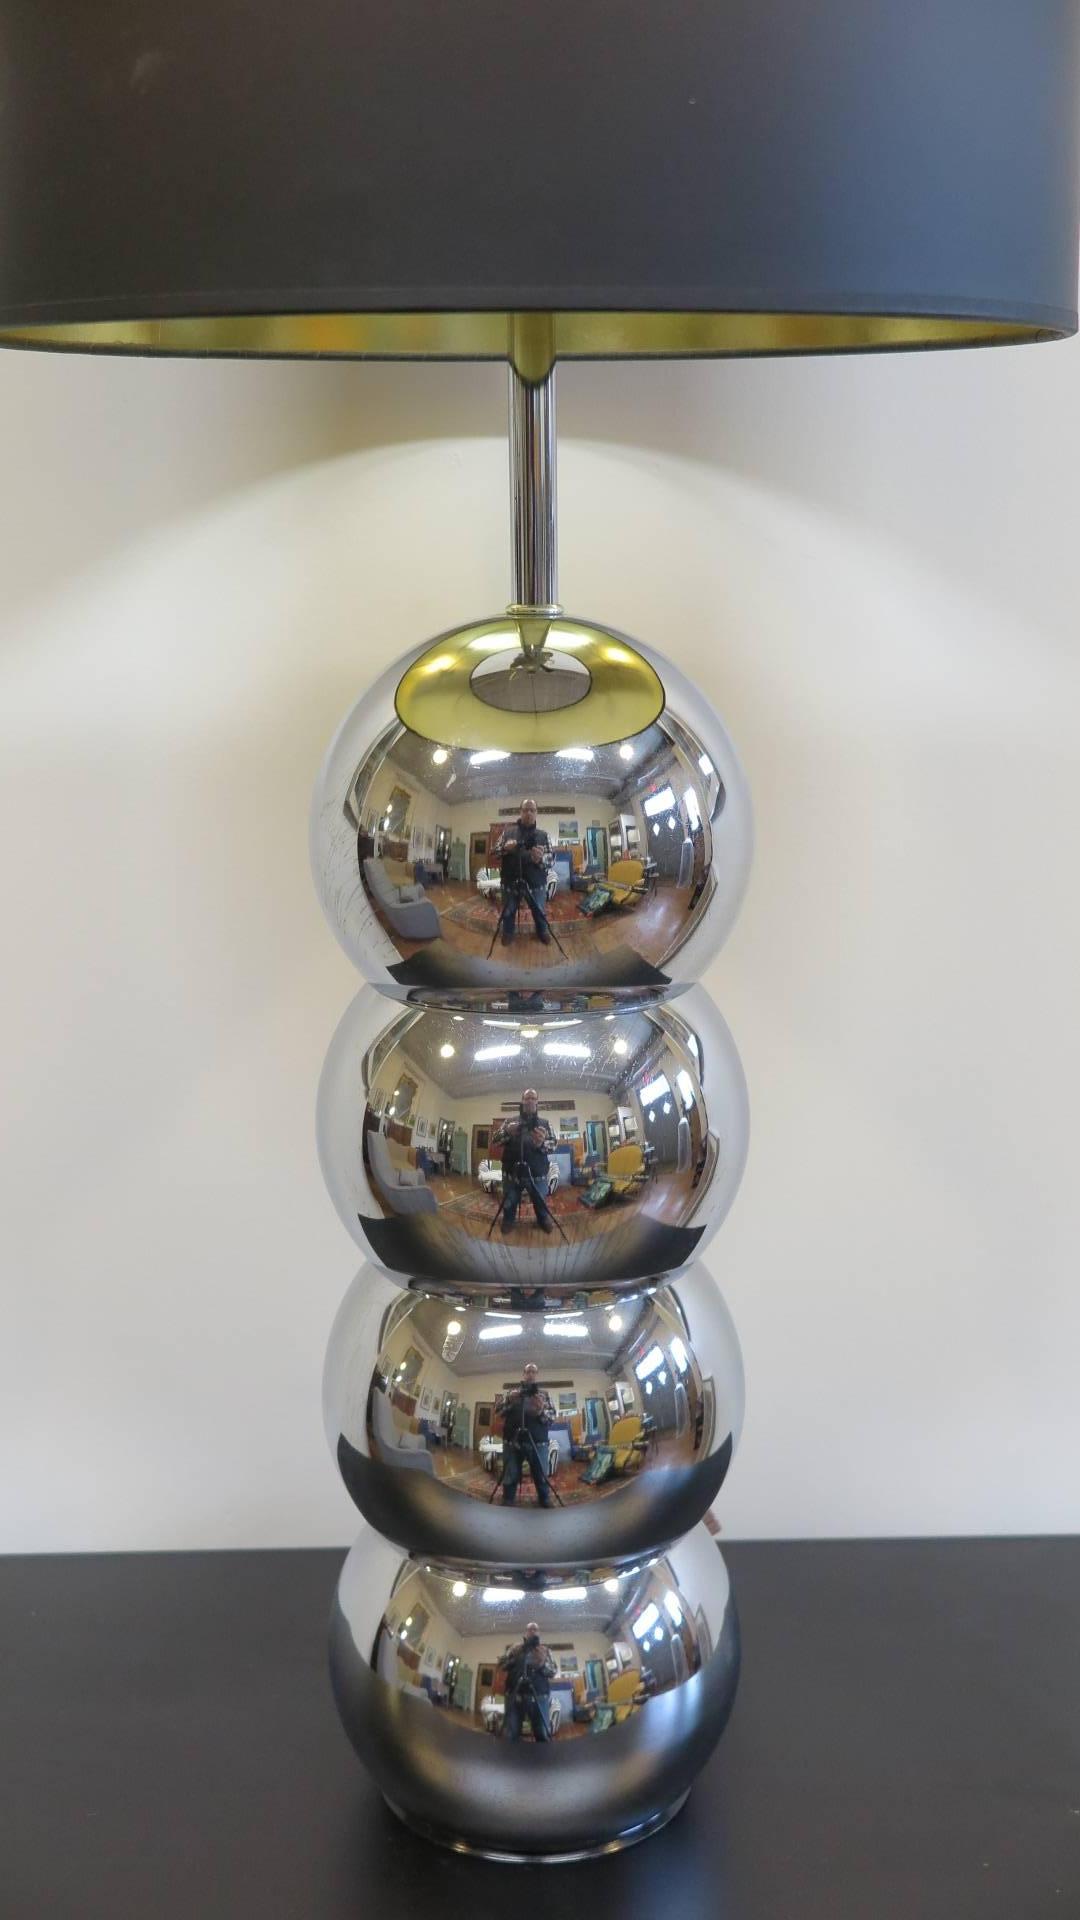 A George Kovacs stacked chrome sphere lamp, 1970. Very good condition
George Kovacs stacked chrome ball lamp, chrome ball lamp,
Current shade is 13 D.